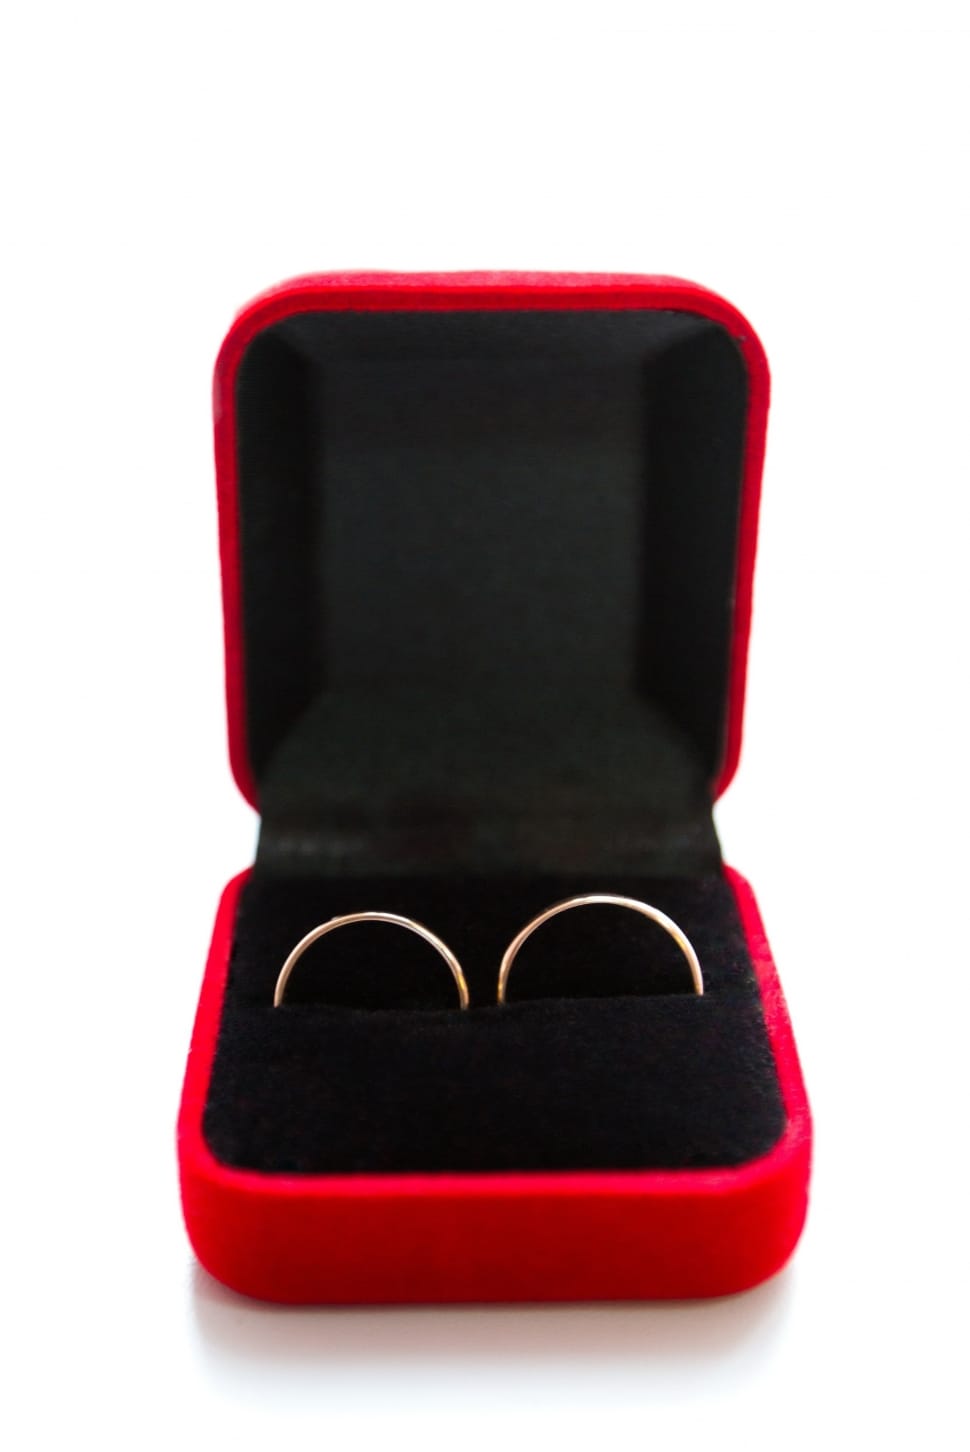 two silver couple ring in red box preview